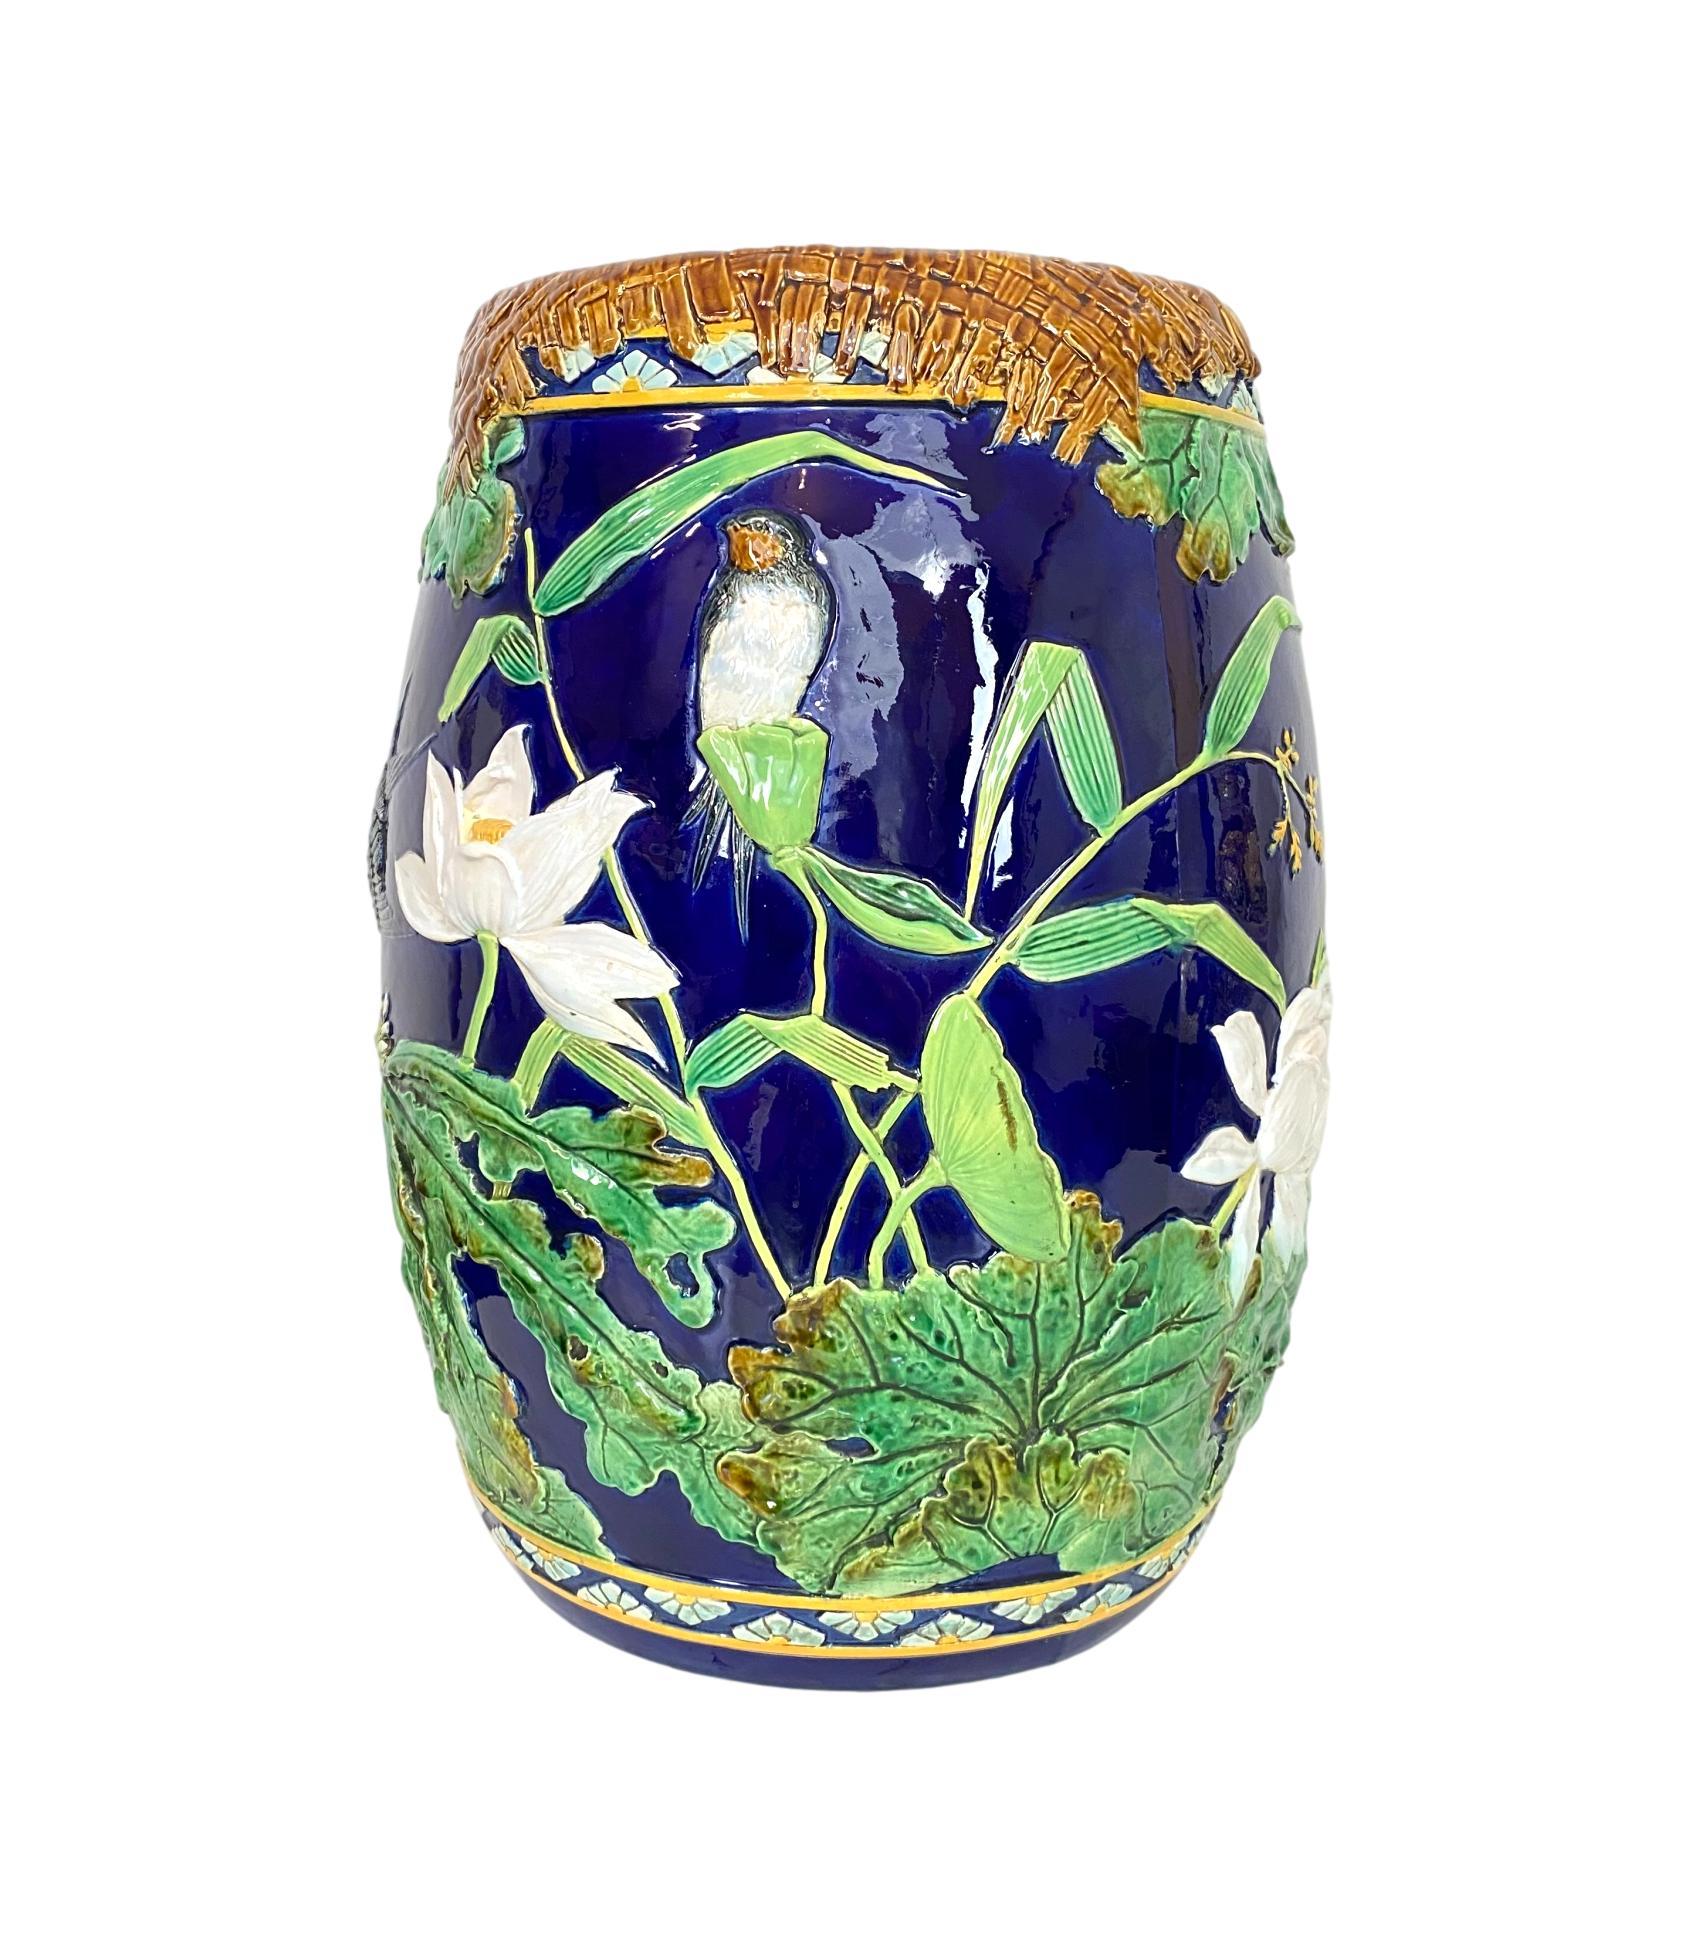 George Jones Majolica Garden seat, of drum-form, naturalistically modeled with Herons and Swallows in a pond setting with water lilies and pond grasses, with Japonisme elements, including a stylized turquoise and yellow glazed band to the top and